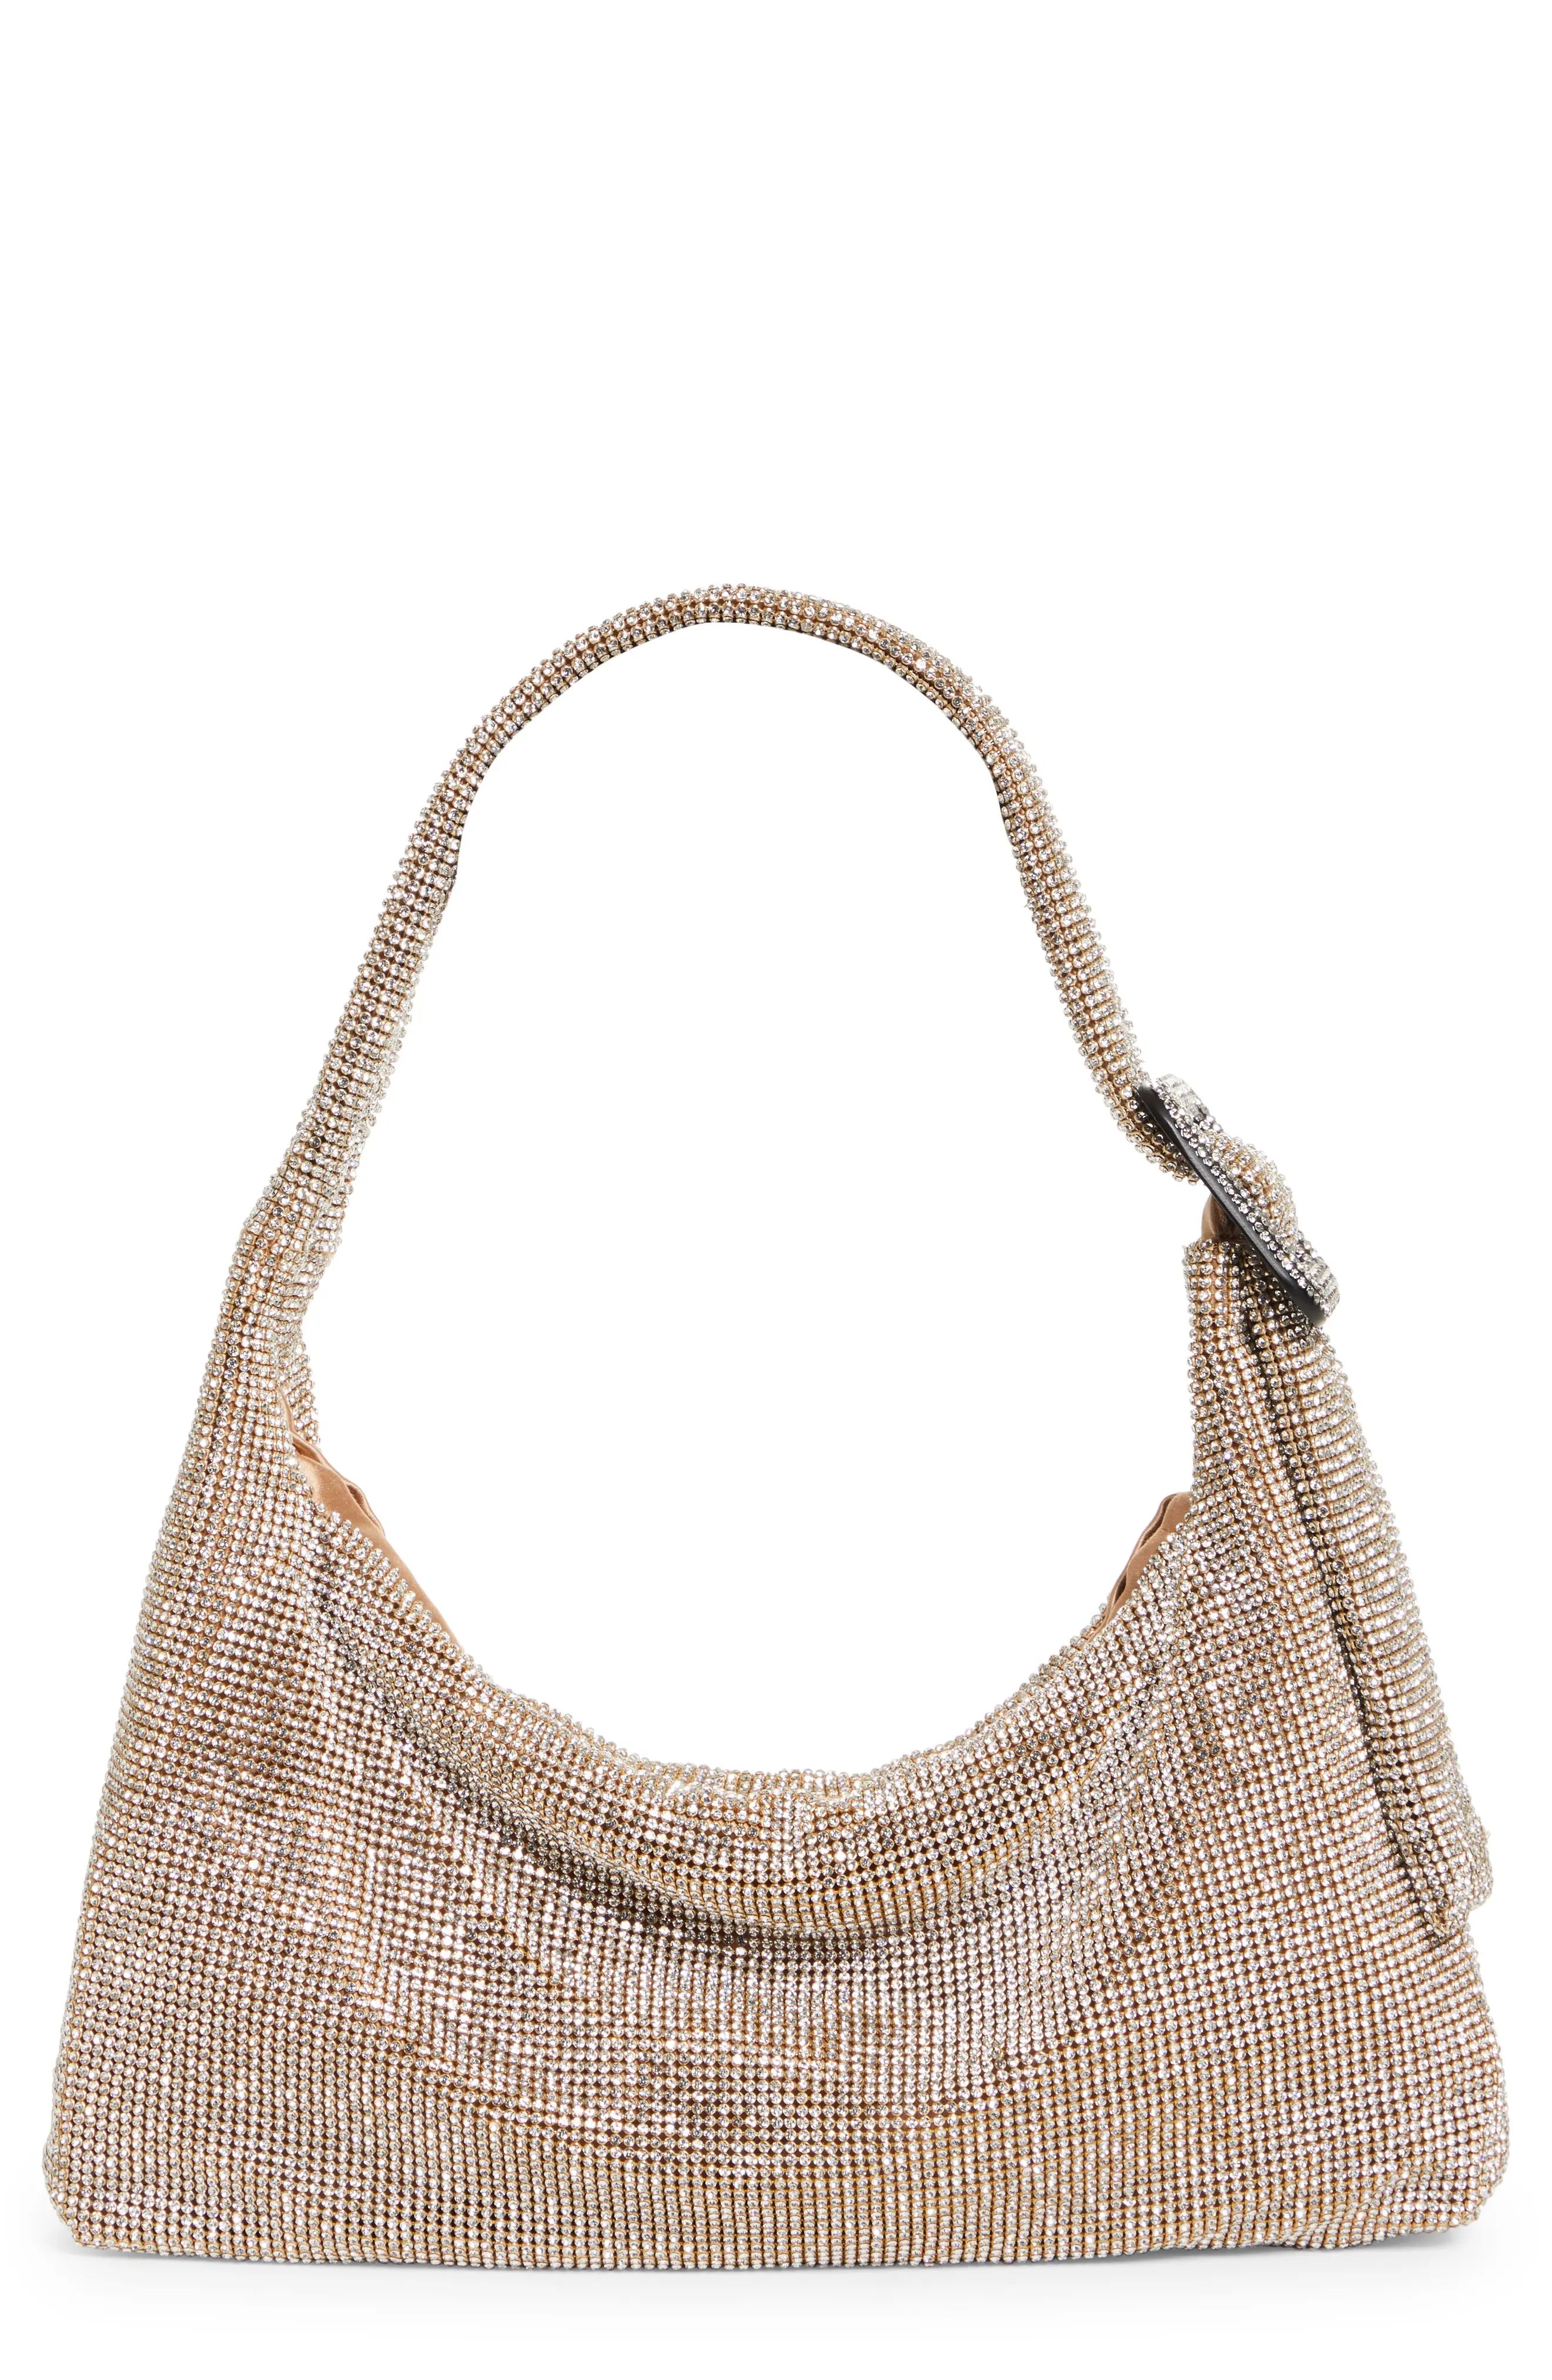 Benedetta Bruzziches Benedatta Bruzziches Pina Bausch Crystal Mesh Hobo in Morning On Canvas at Nord | Nordstrom